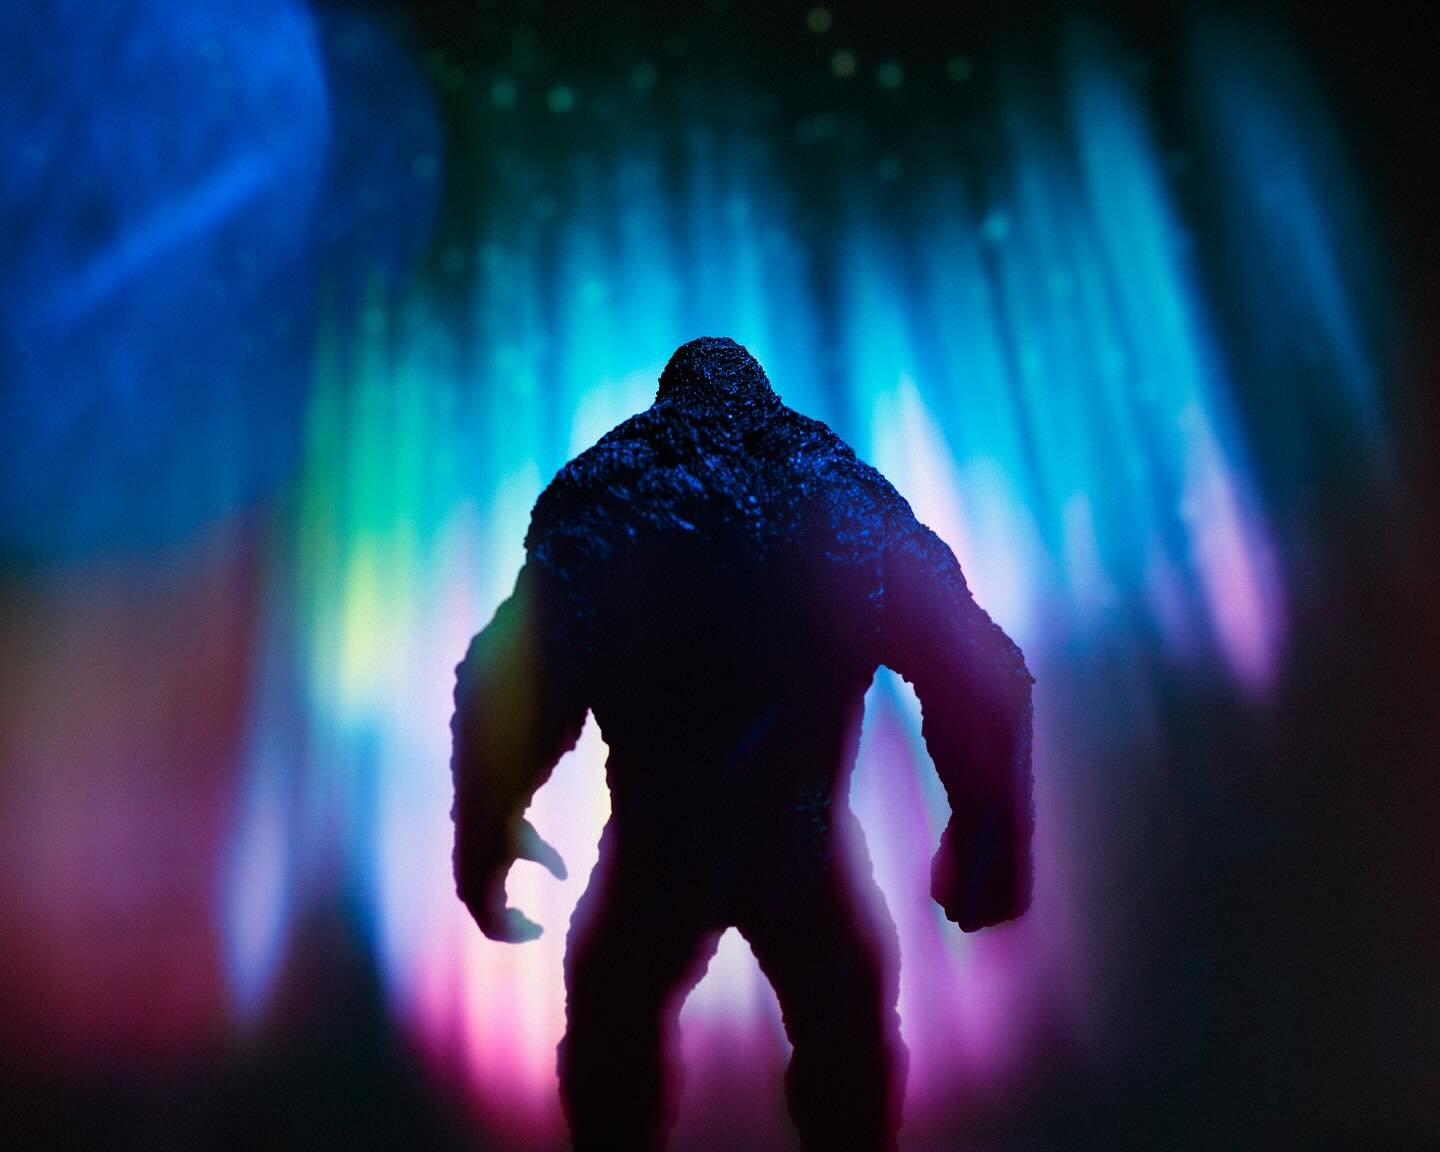 Kong watching the aurora borealis on Skull Island.

@xpluscollectibles 
 toy photography.

#northernlights